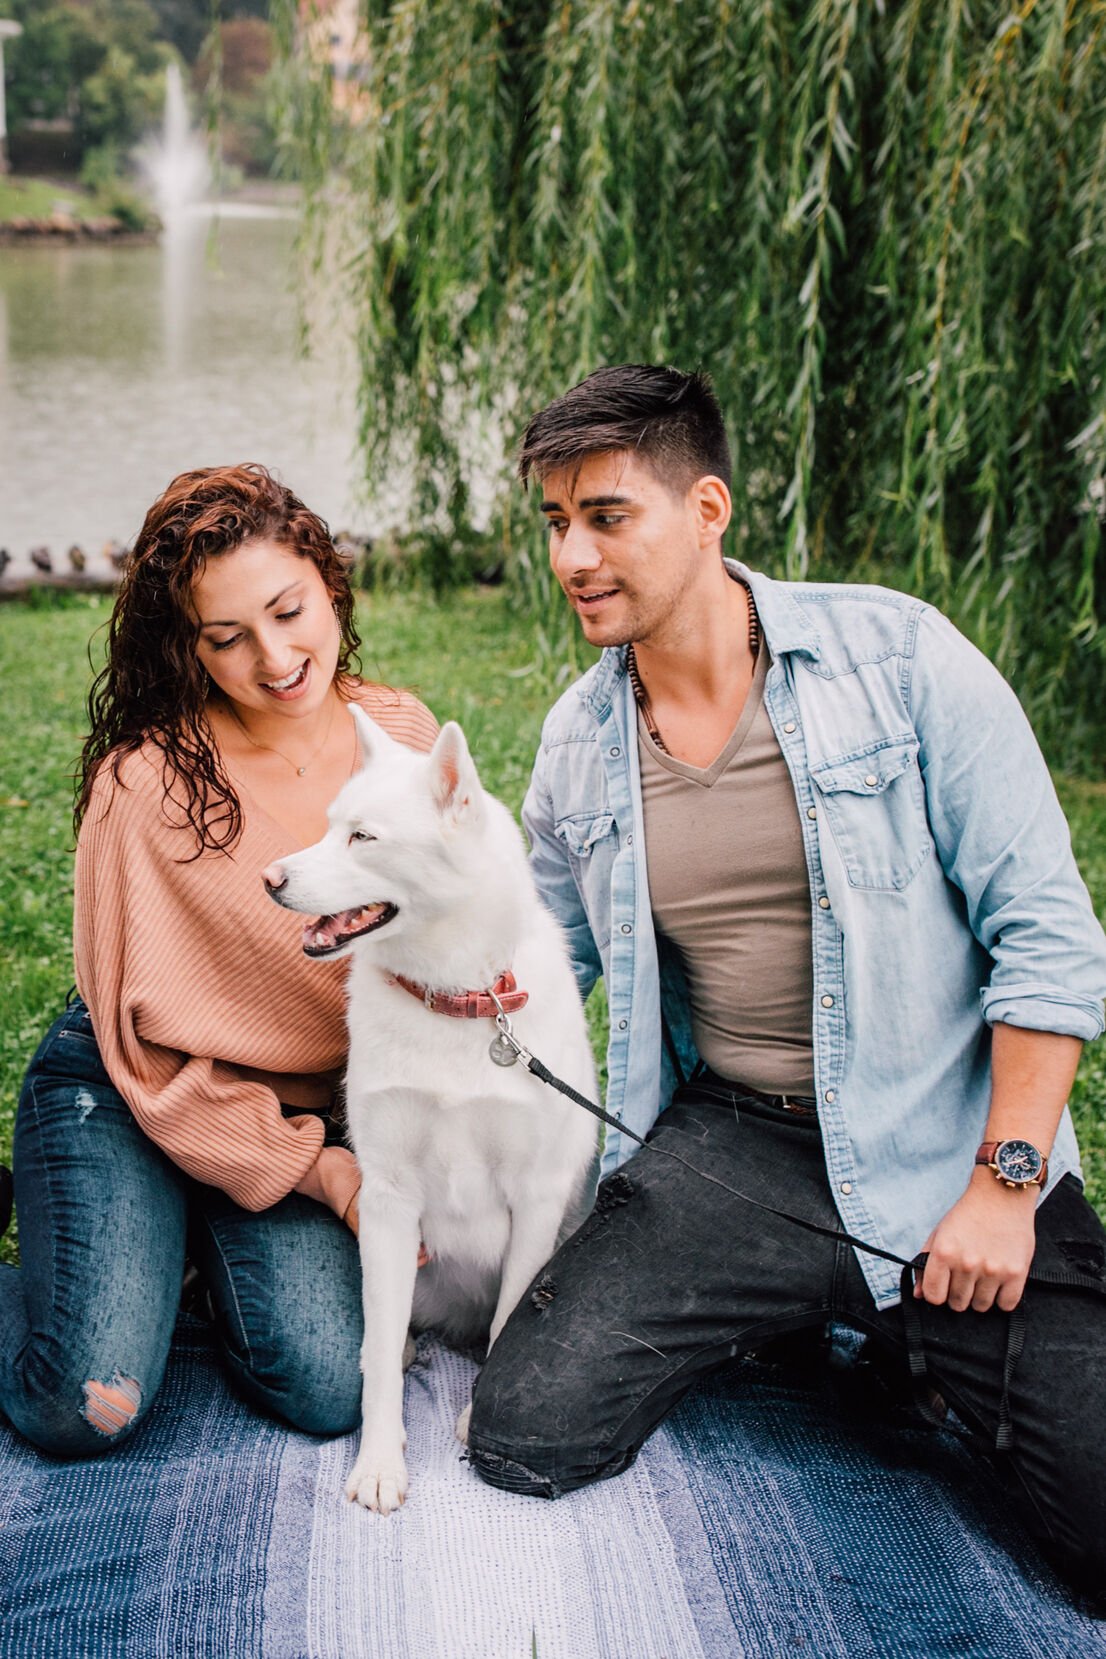  pablo looks at jessica adoringly as she looks at their dog who is smiling between them as they take dog engagement photos 